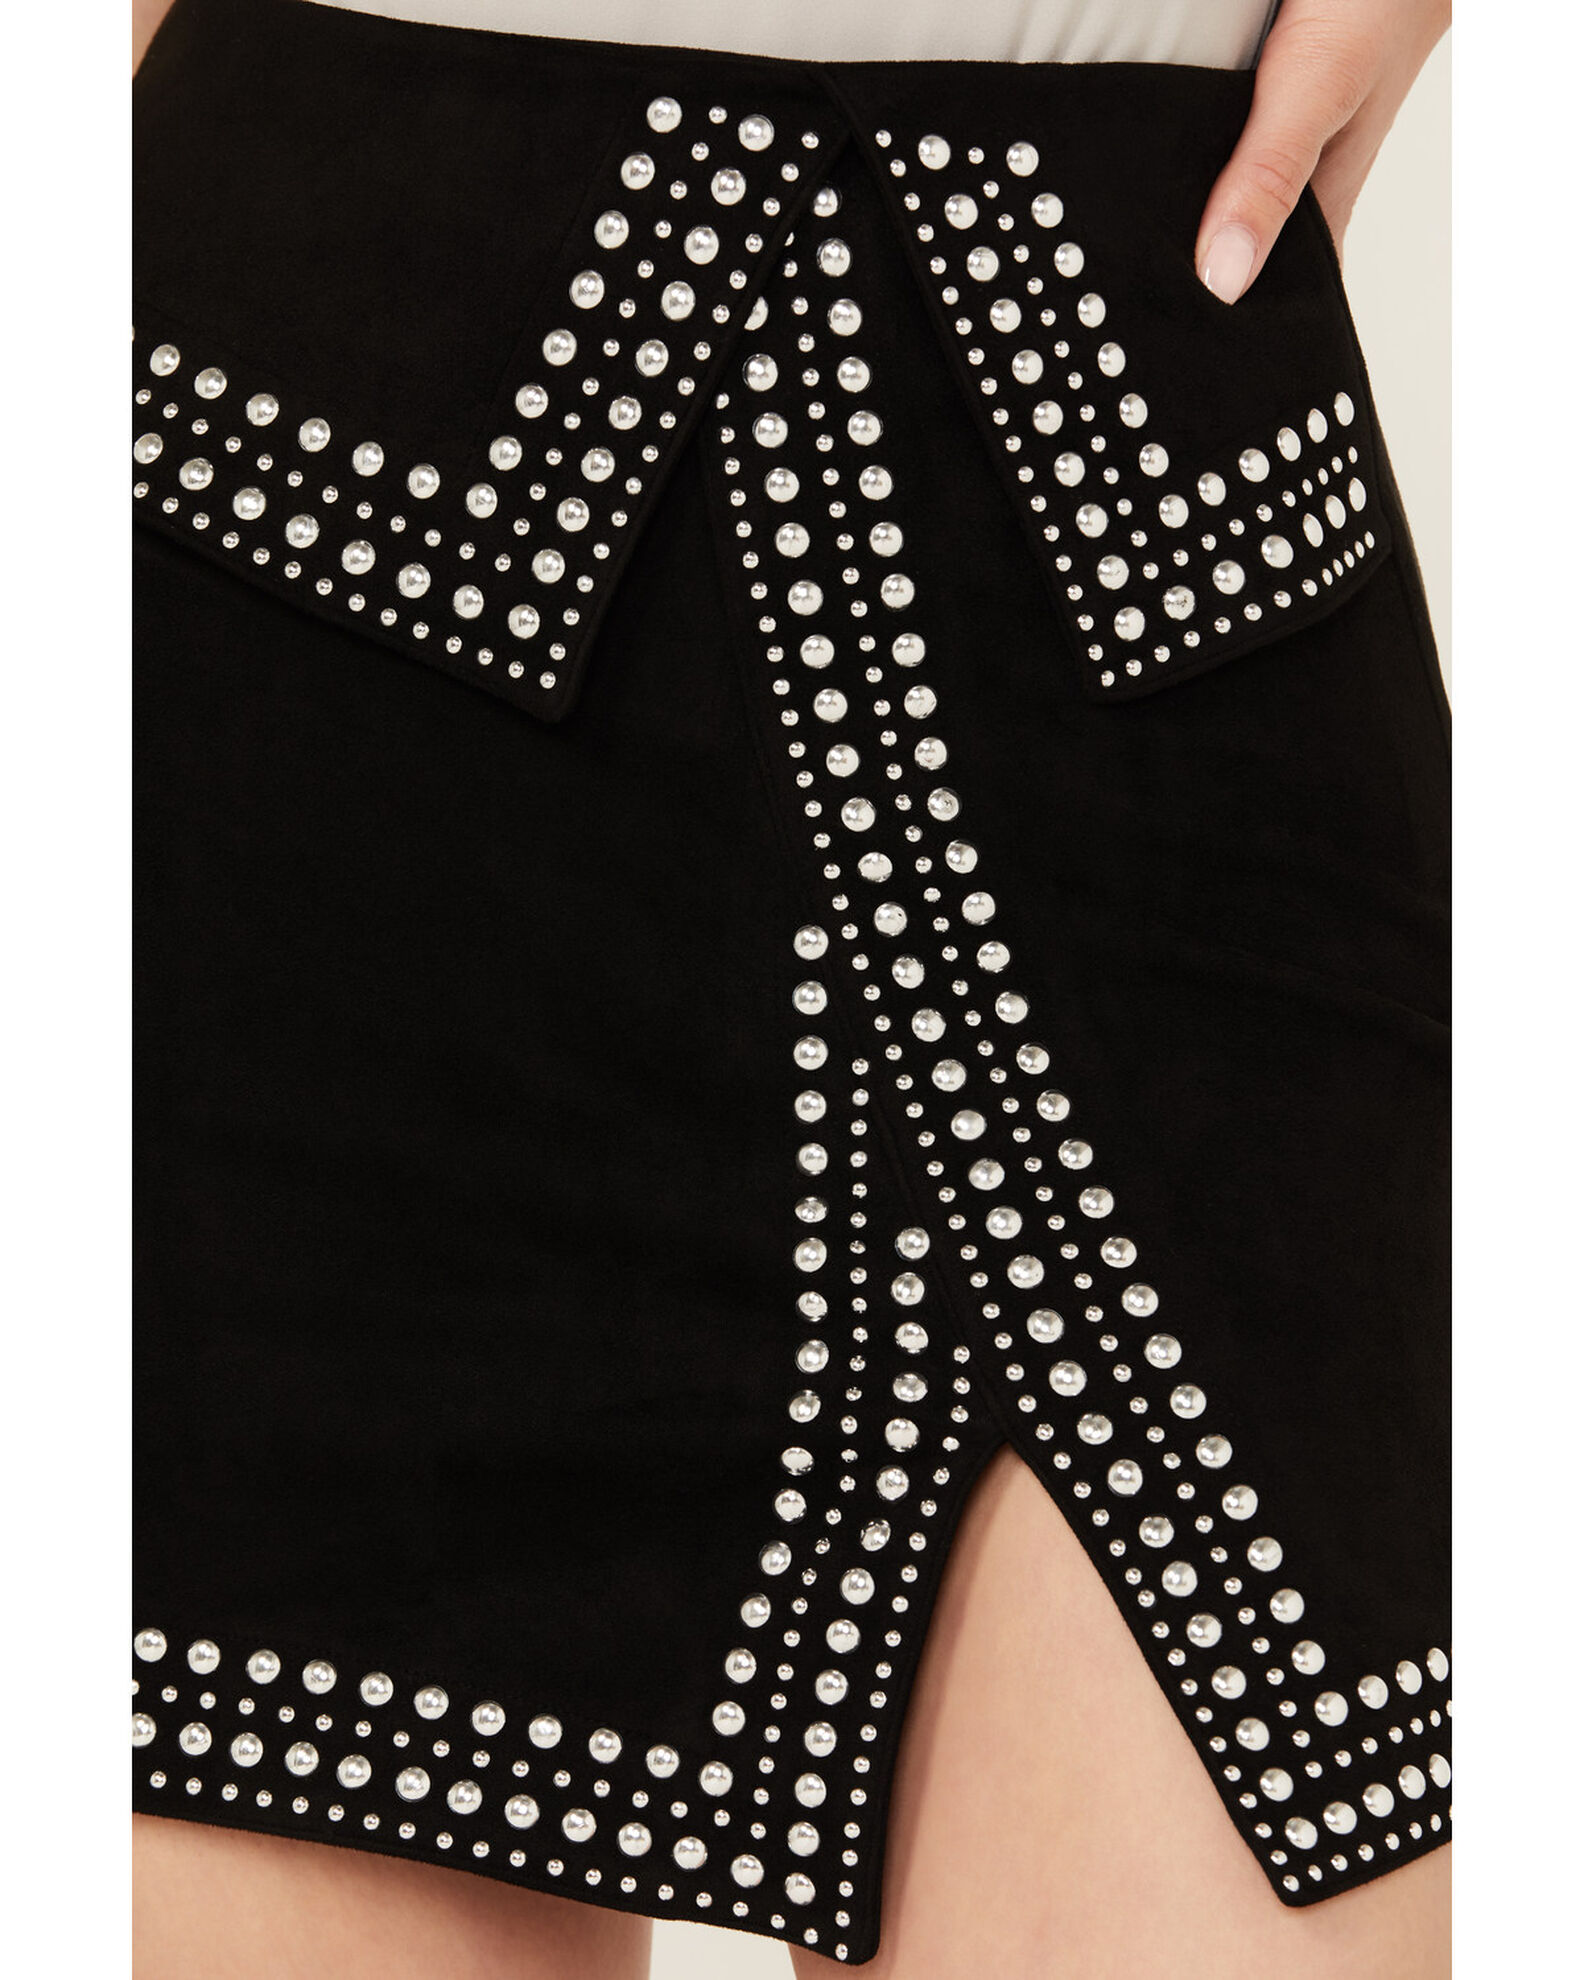 Vocal Women's Faux Suede Studded Mini Skirt